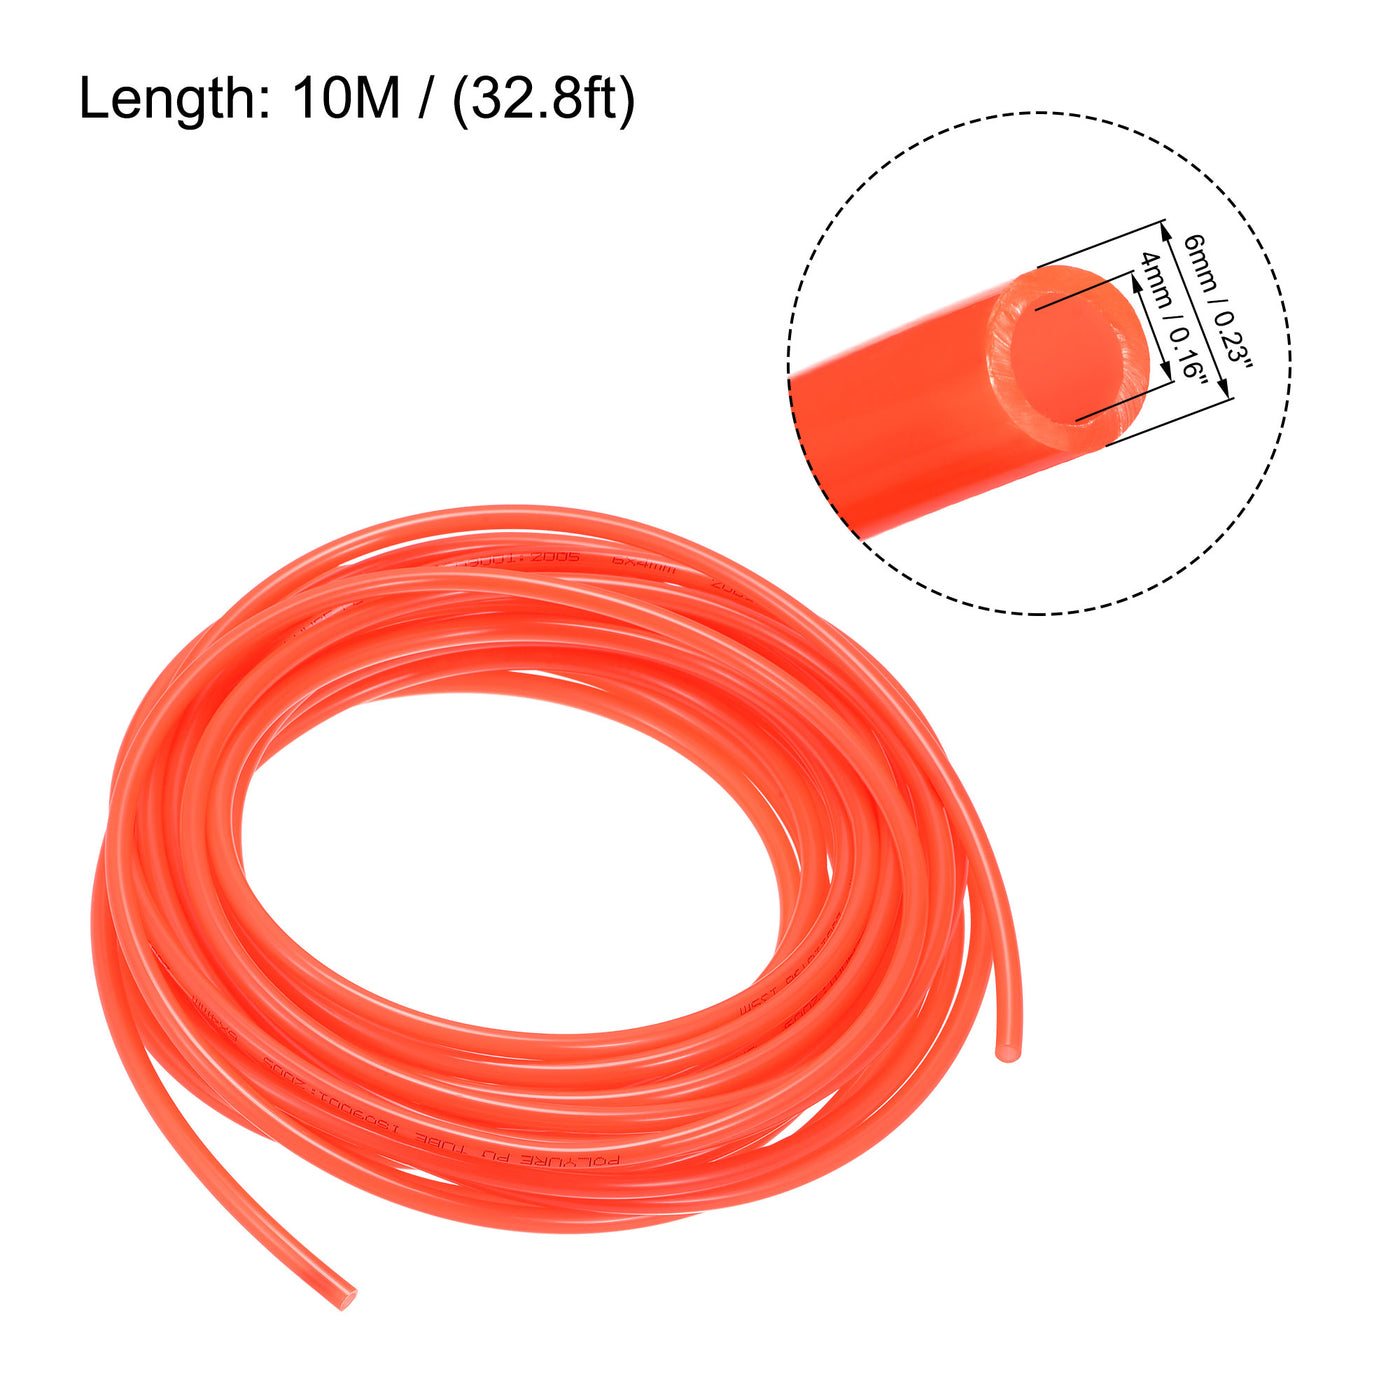 uxcell Uxcell Pneumatic Air Hose Tubing PU Air Compressor Tube 4mm/0.16''ID x 6mm/0.23''OD x 10m/32.8Ft Polyurethane Pipe Bright Orange with Connect Fitting Kit